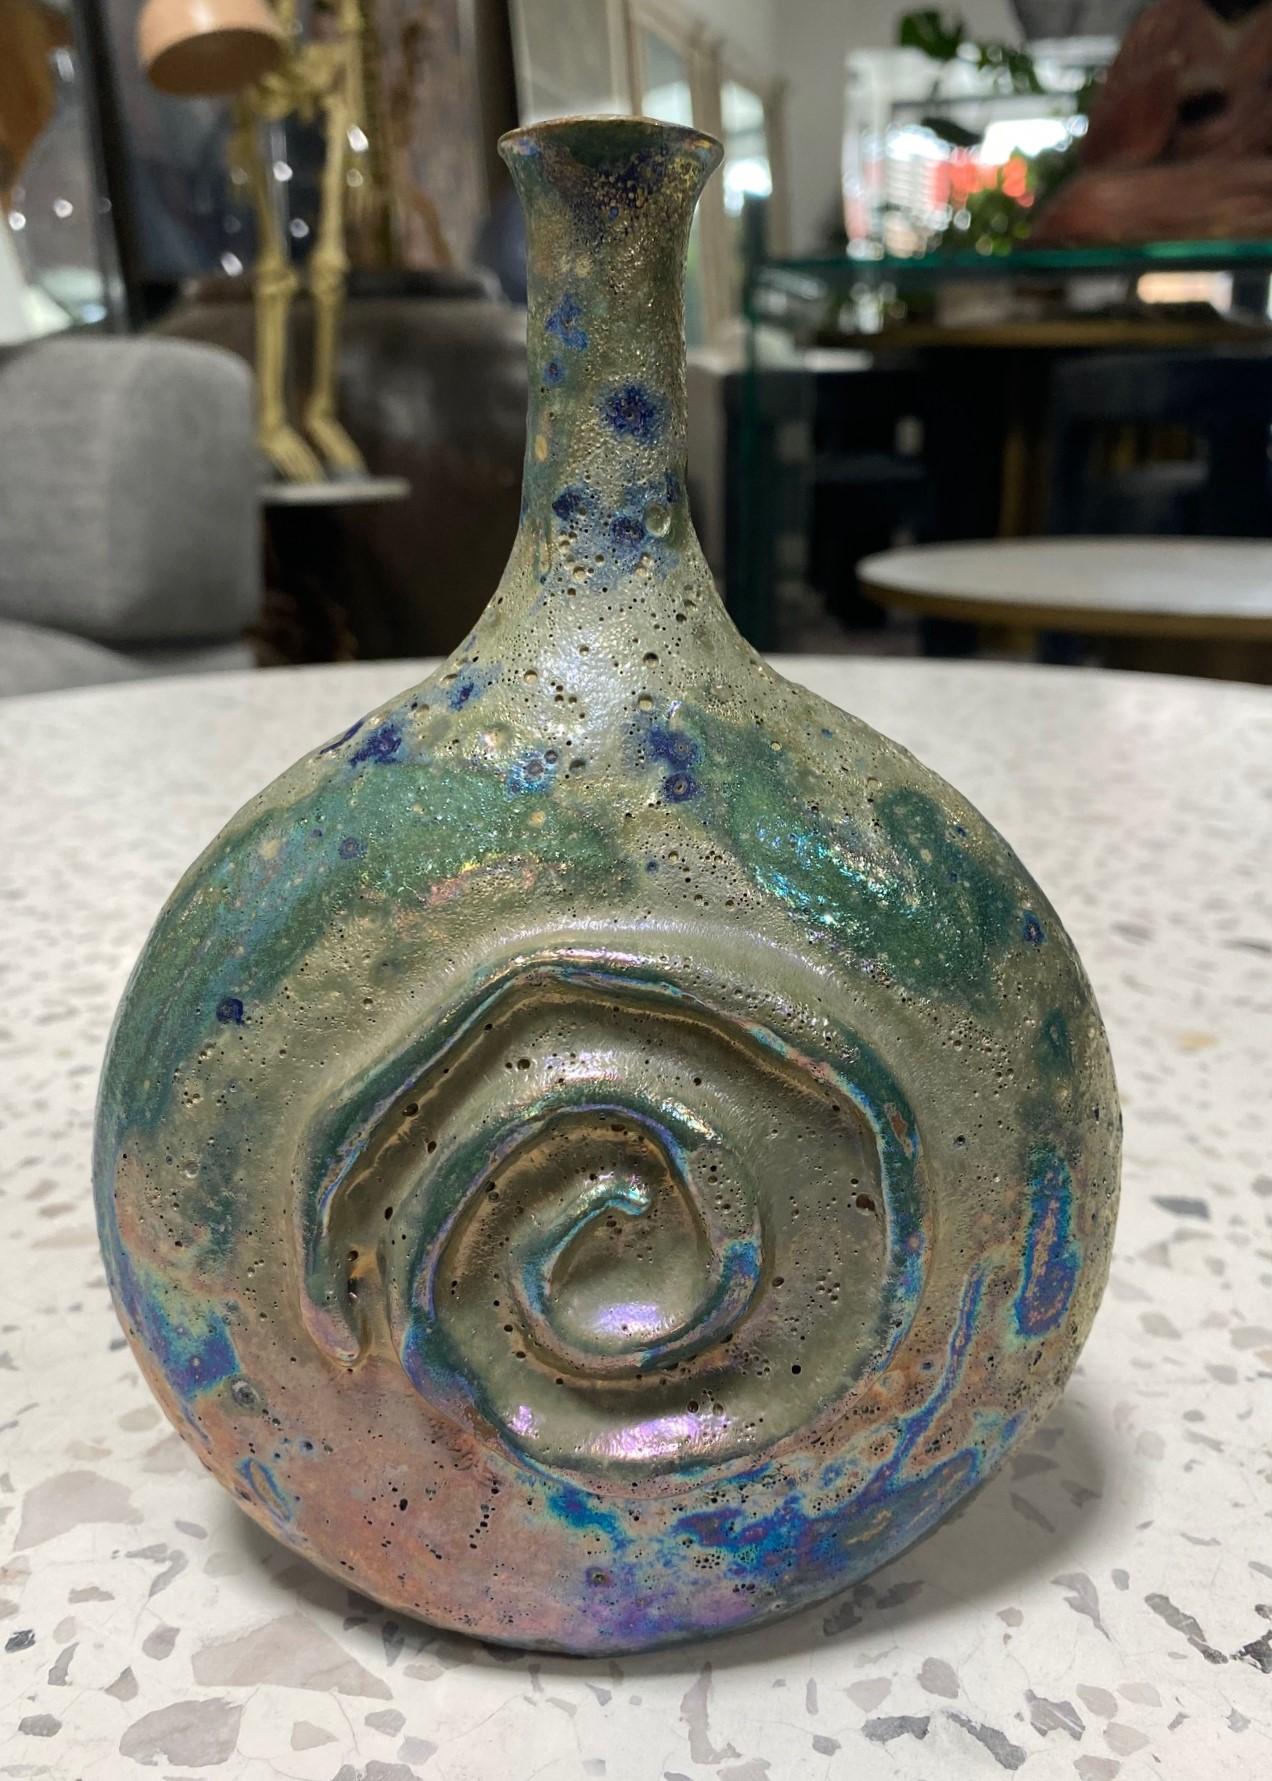 A wonderfully designed work by famed American California Studio master ceramist Beatrice Wood featuring a gorgeous, sumptuous, iridescent luster (lustre) volcanic lava crater glaze (her most coveted glaze) with spiral decoration.  The colors shift